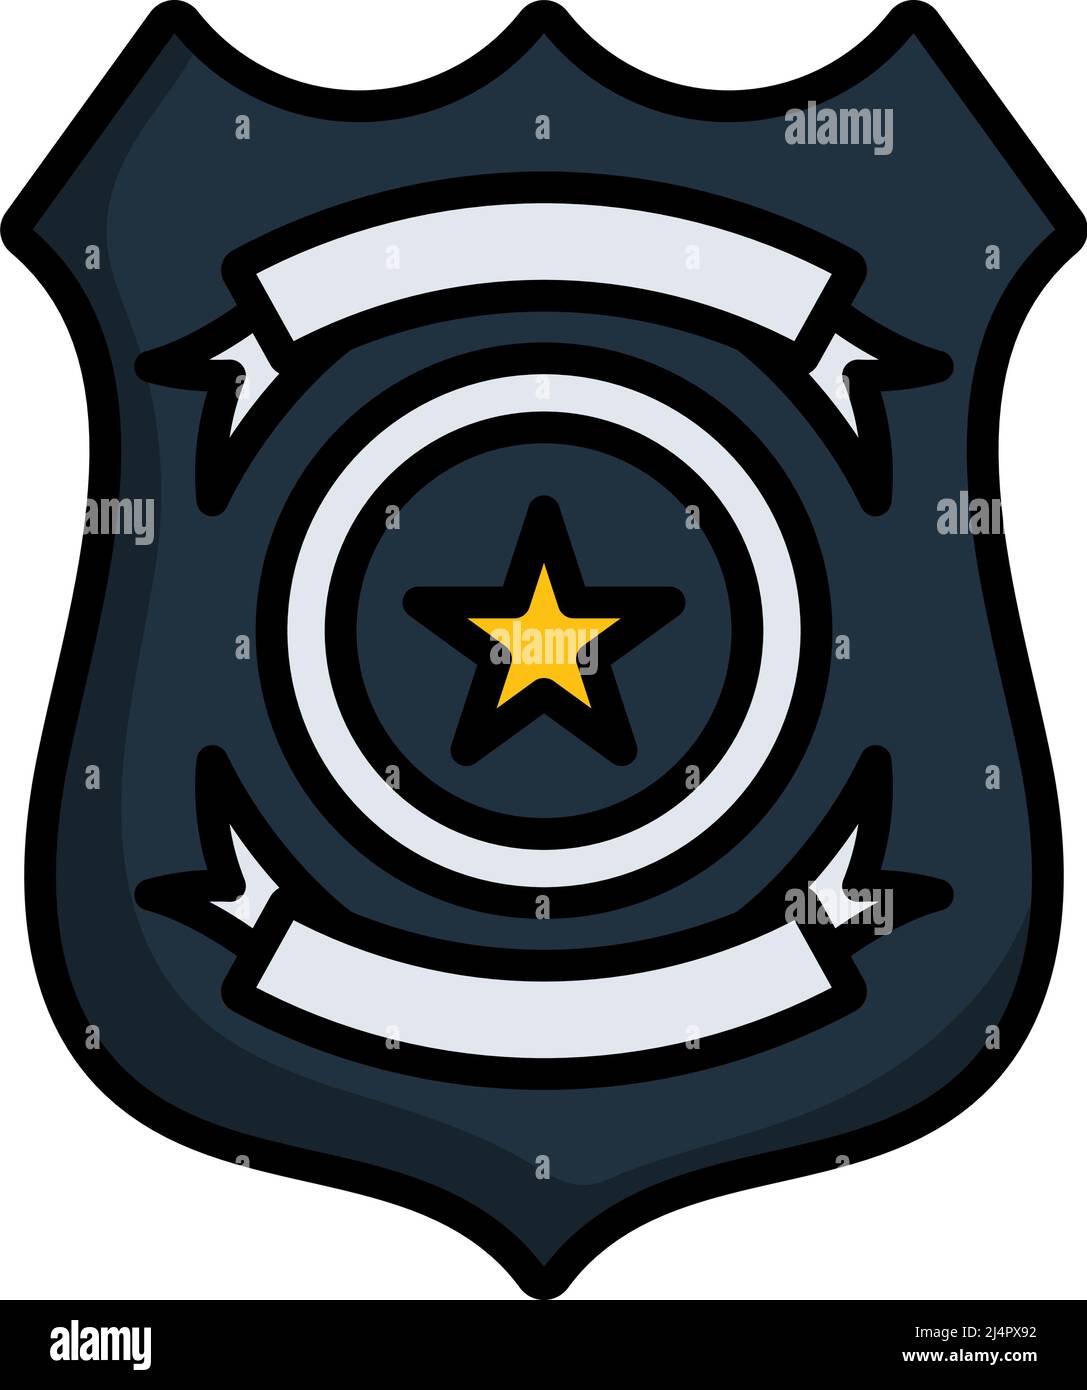 Silver steel police security badge isolated Vector Image